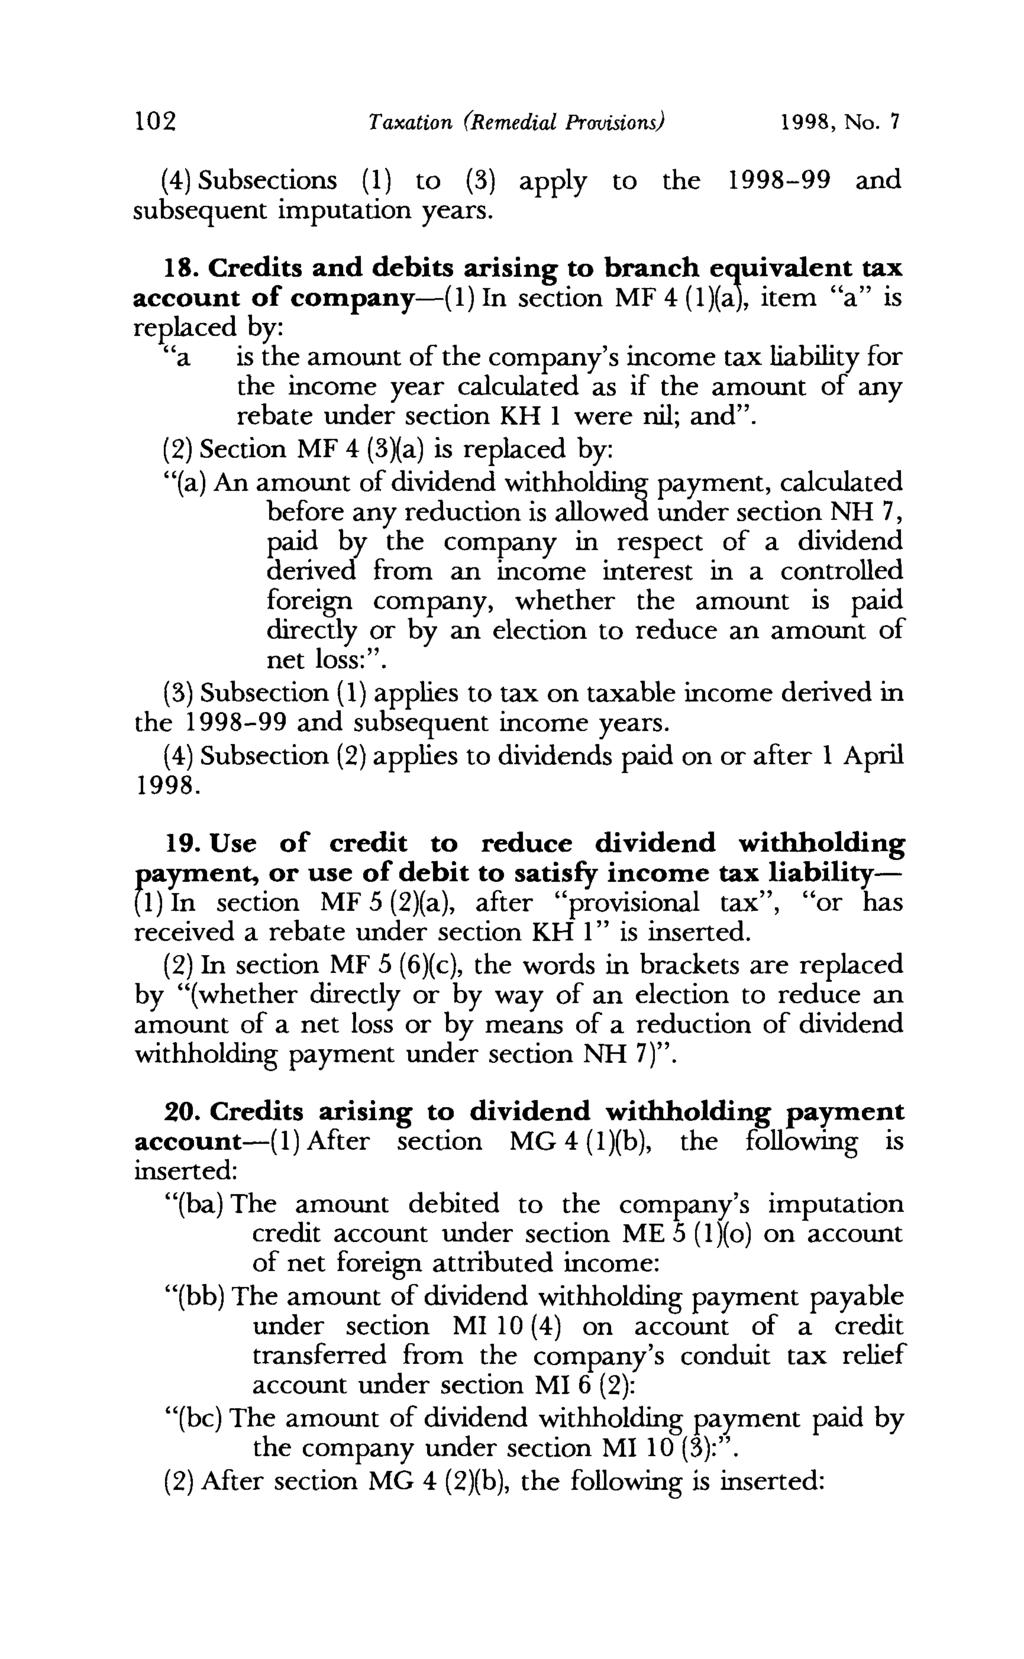 102 Taxation (Remedial Pravisions) 1998, No. 7 (4) Subsections (1) to (3) apply to the 1998-99 and subsequent imputation years. 18.